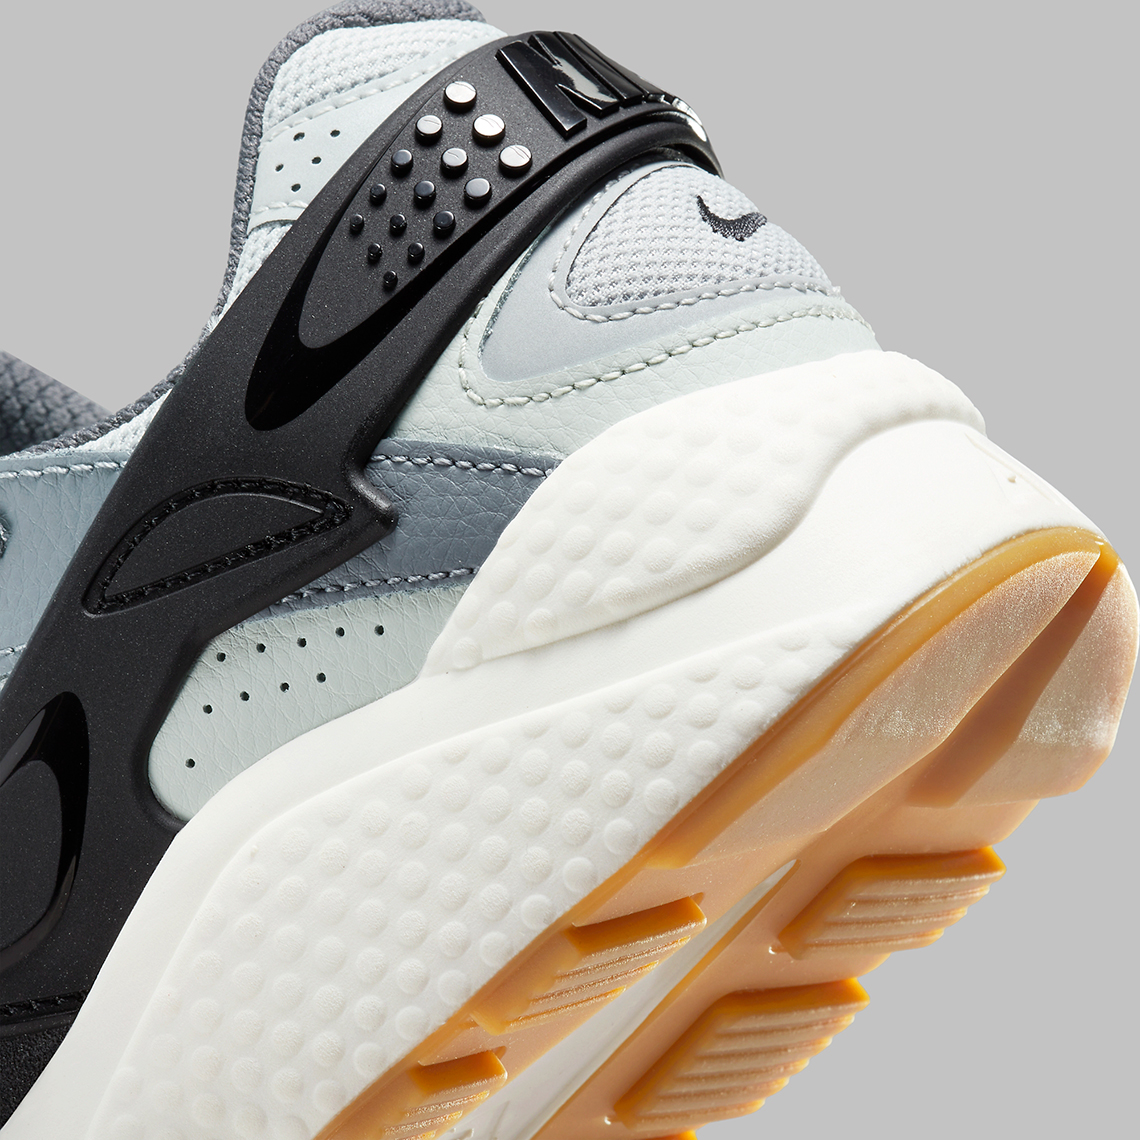 A Stealth Grey Option For The New Nike Air Huarache Ultra